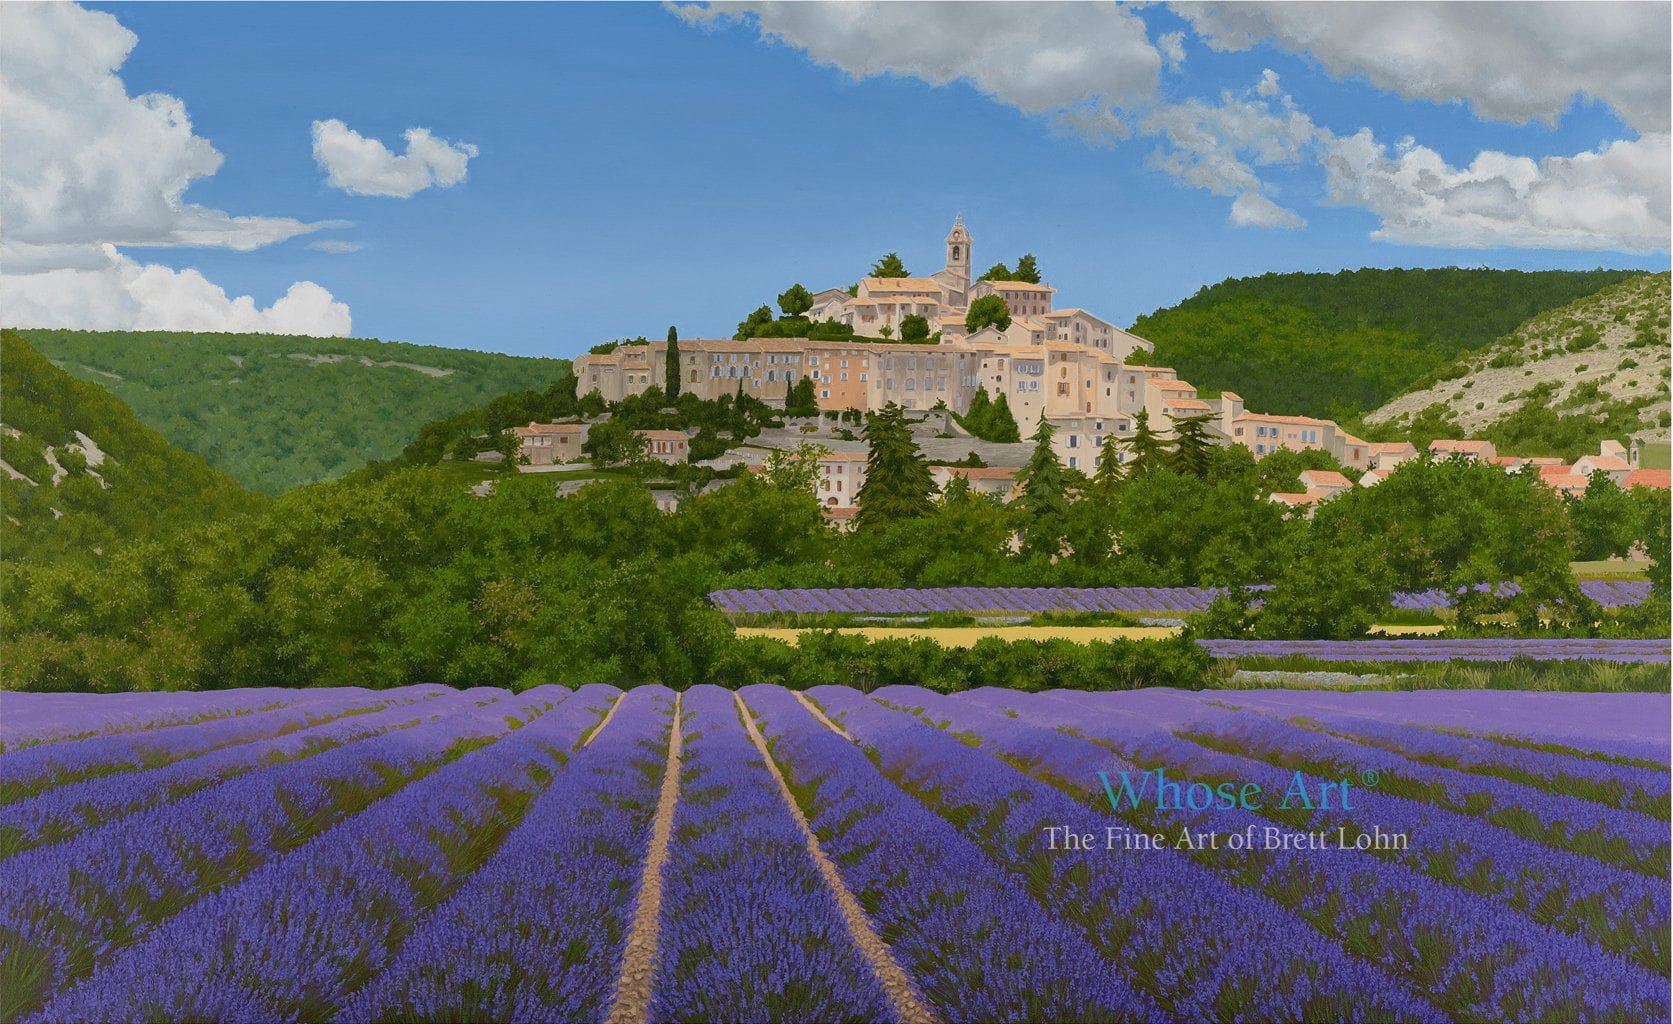 Wall art print of a hill village surrounded by lavender fields in Provence, France. This oil painting shows lavender in rows.